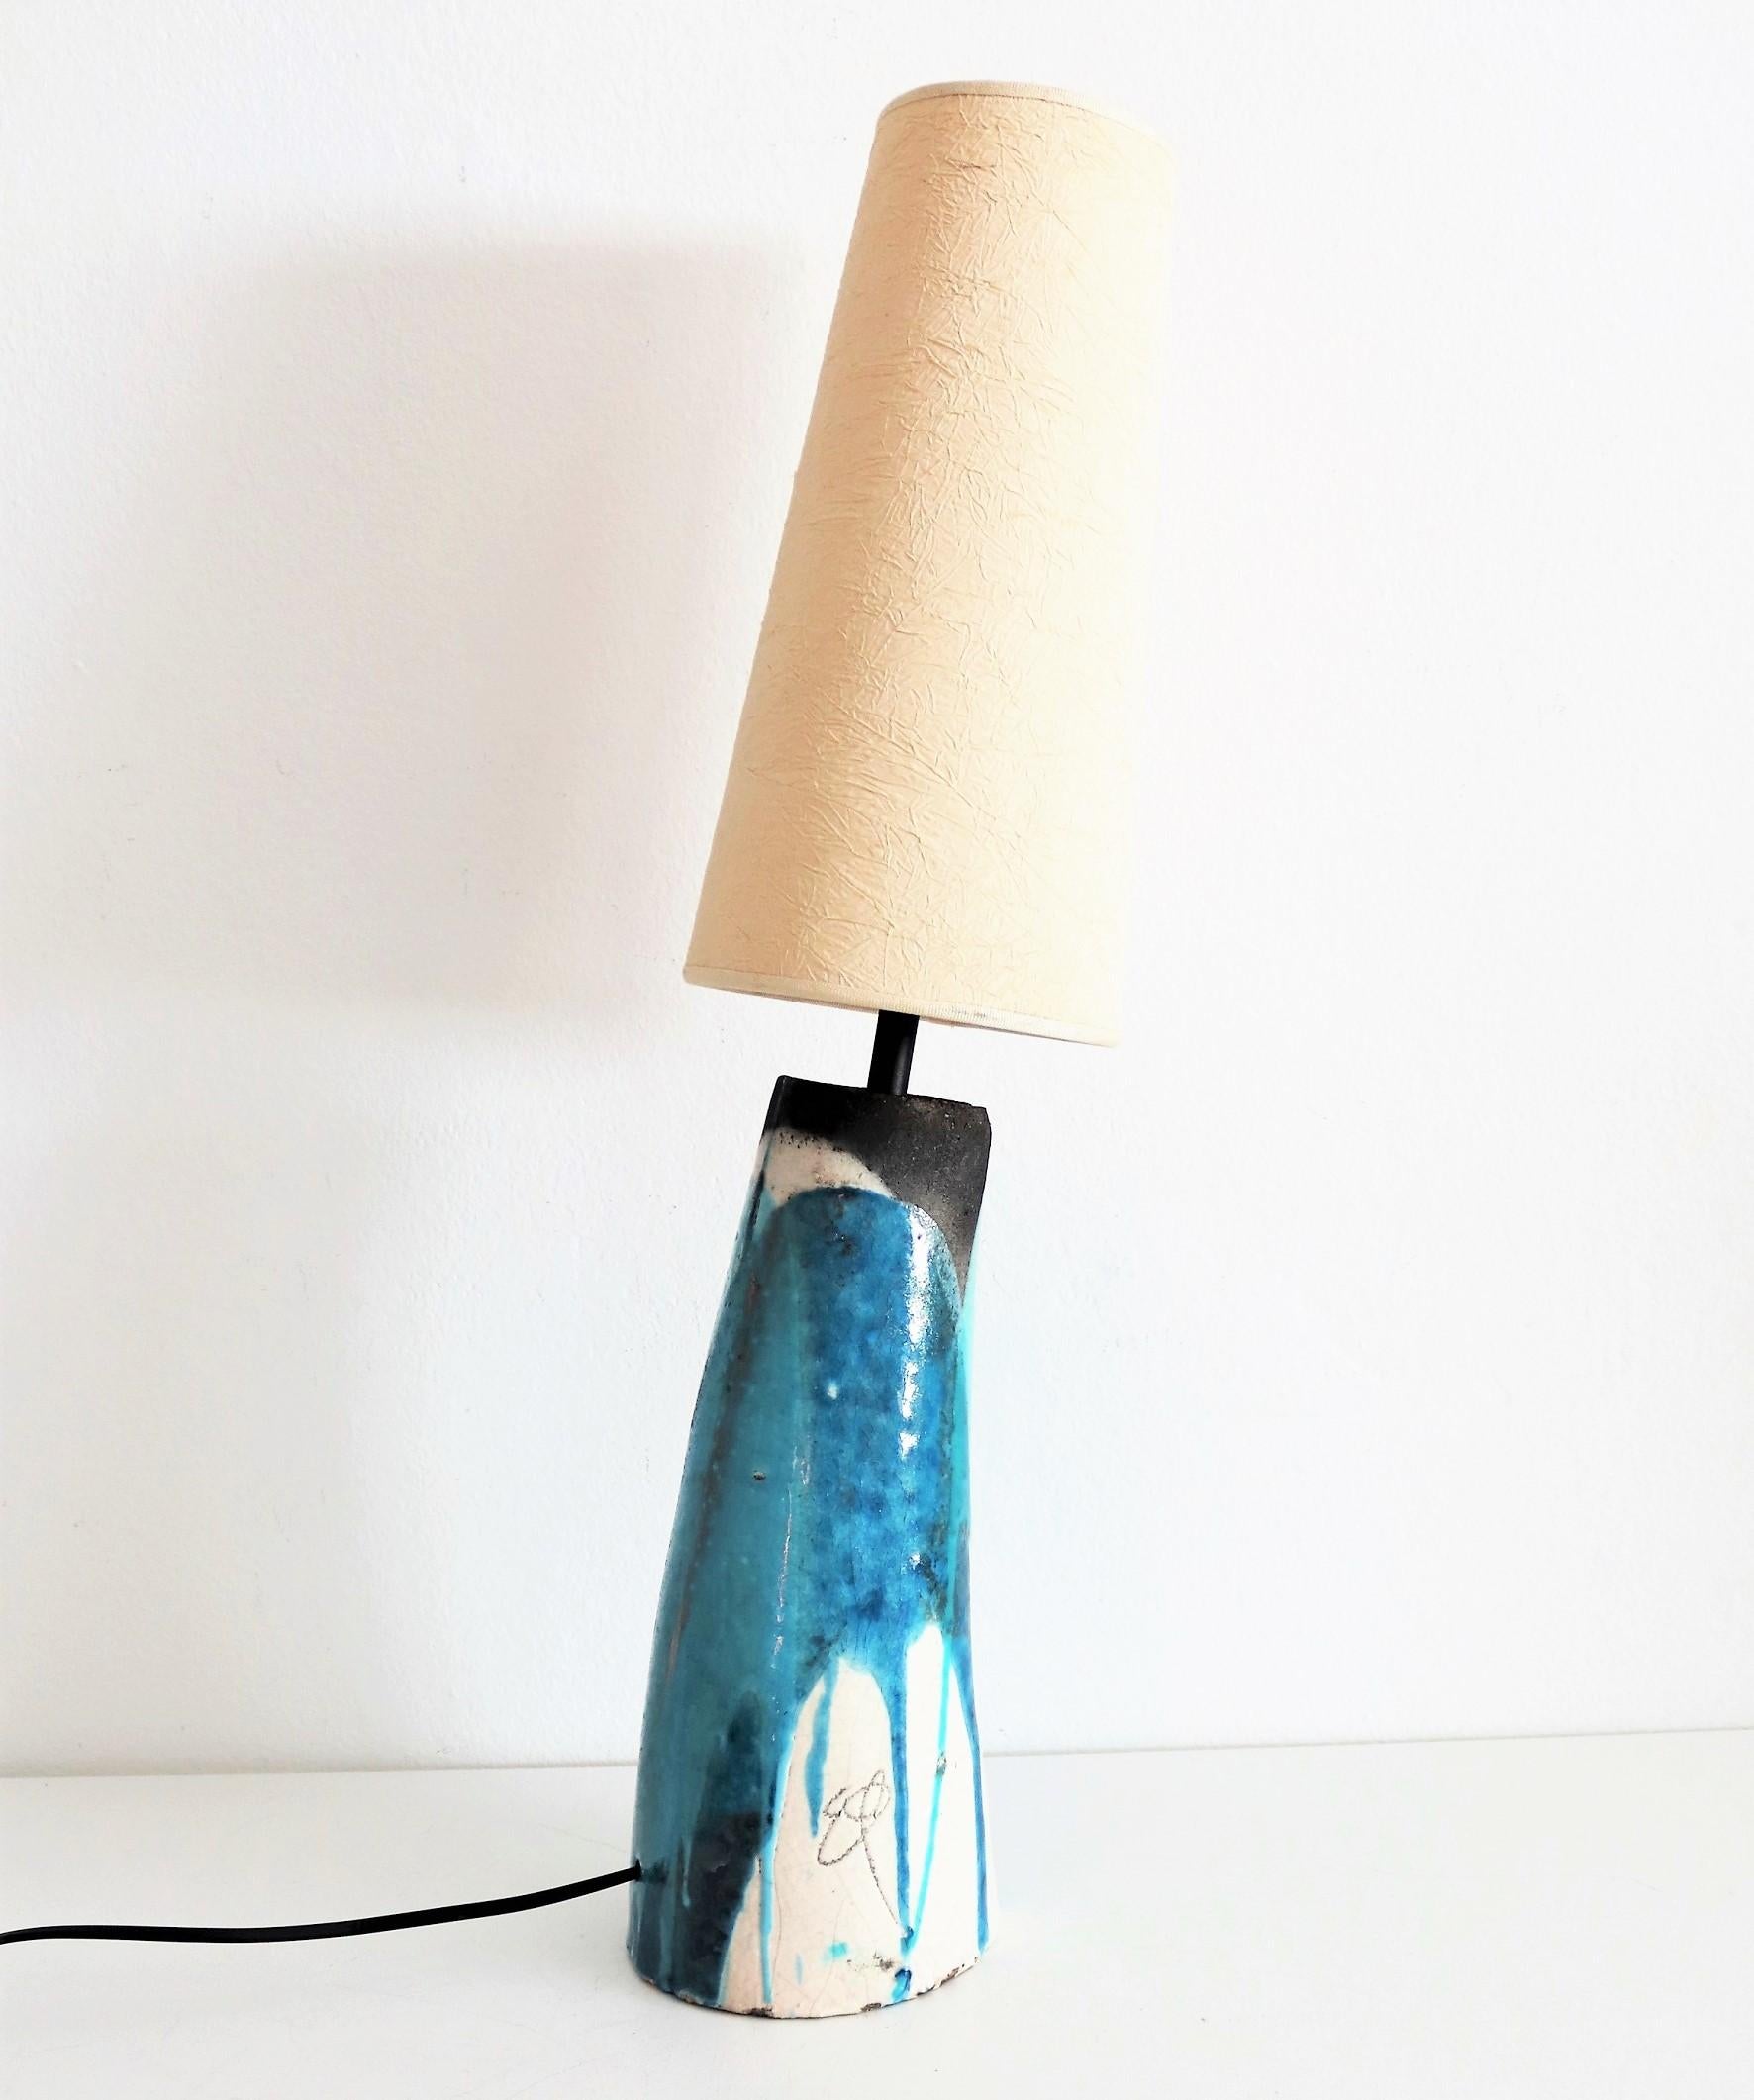 Gorgeous and unique hand-crafted table lamp made of ceramic, dark pottery.
Made in Italy, Sardinia, by artisan - ceramist Pilia, in the 1970s. Pilia closed down his artisan production some years back.
The lamp's base in curved, and has a custom